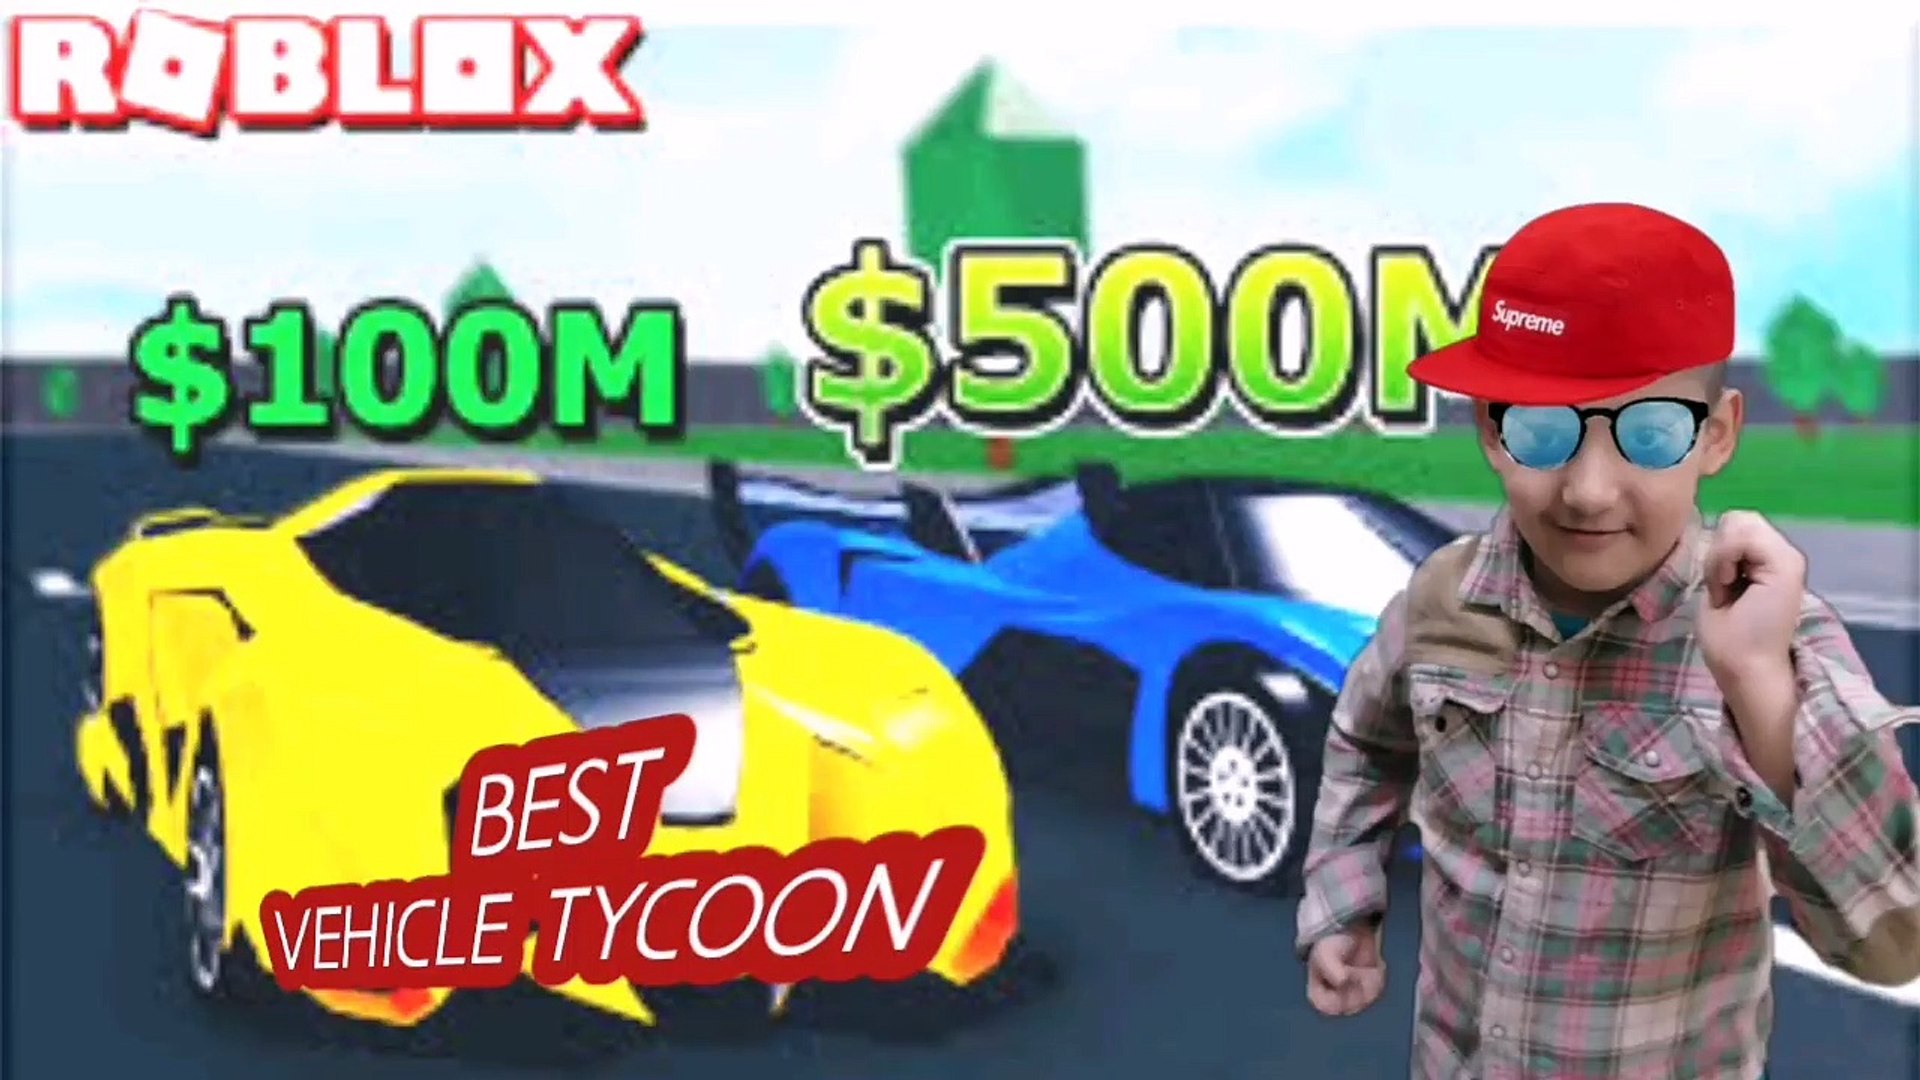 Best Vehicle Tycoon Roblox By Sob In Sobsamgames Video Dailymotion - roblox vehicle tycoon live streams